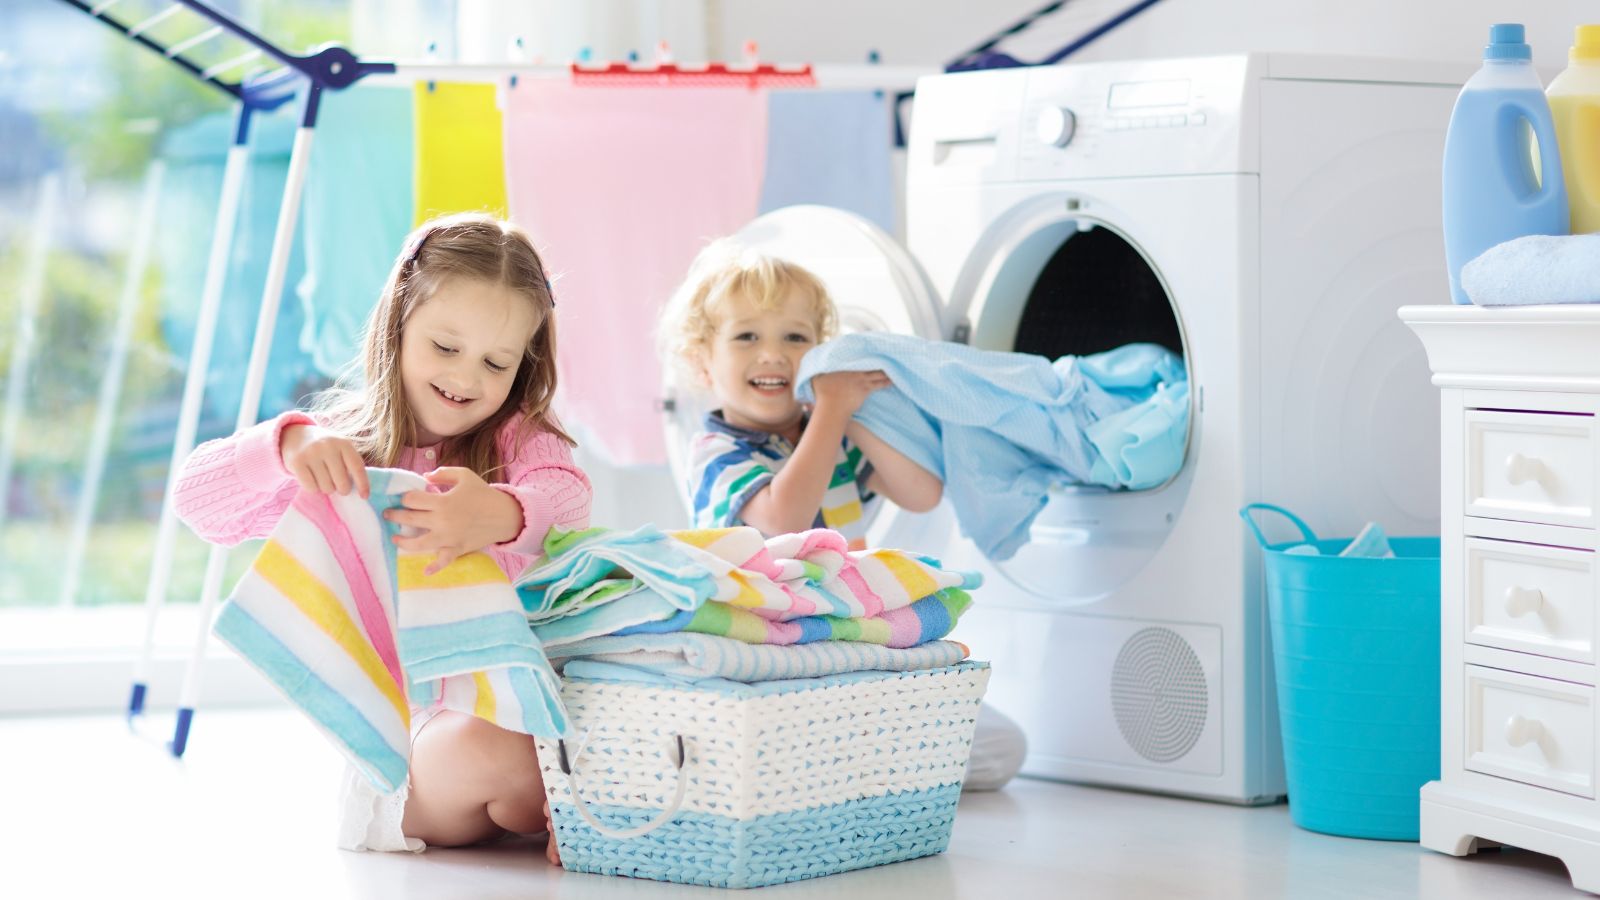 Kids completing chores folding clothes out of the dryer